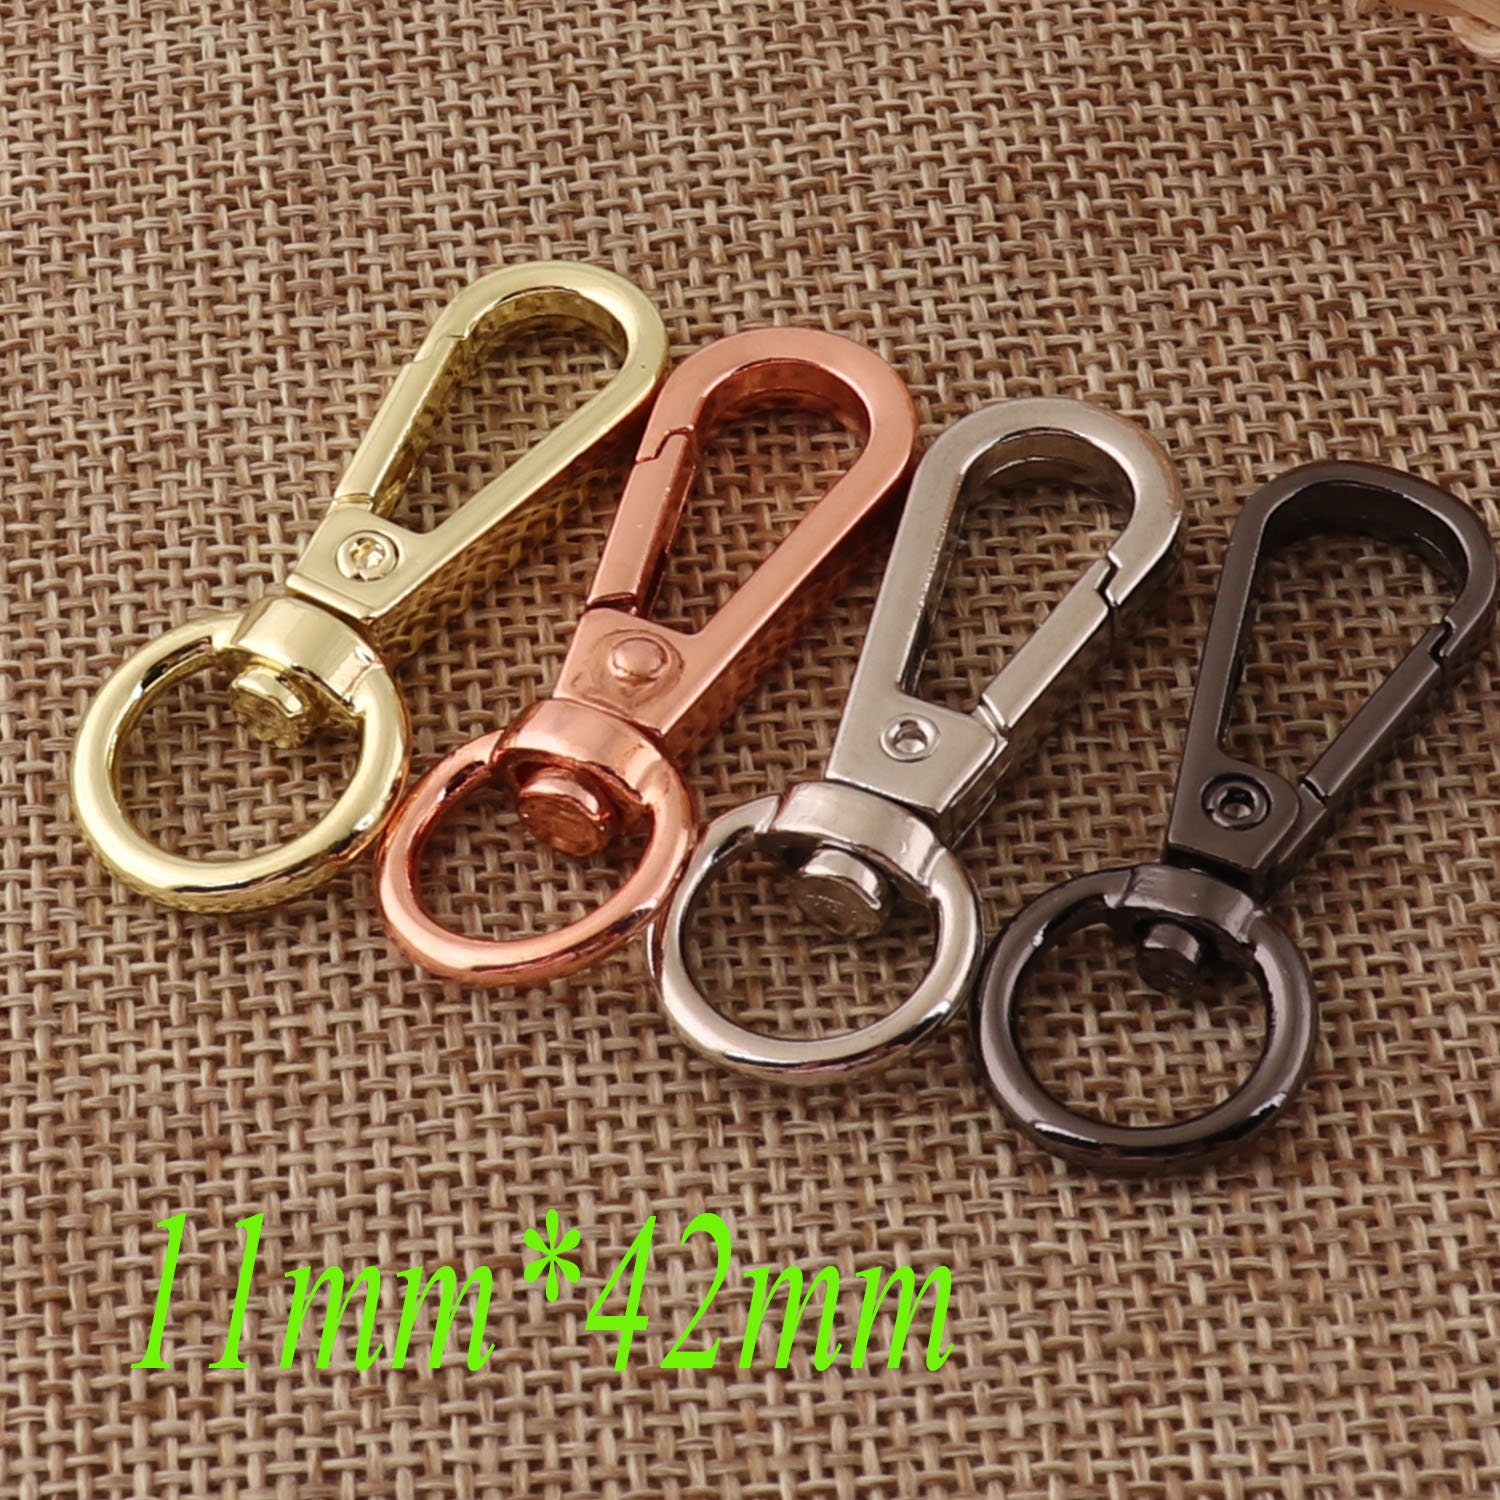 Plastic Keychain Connector Tab/snap/clip Alternative to Jump Ring 